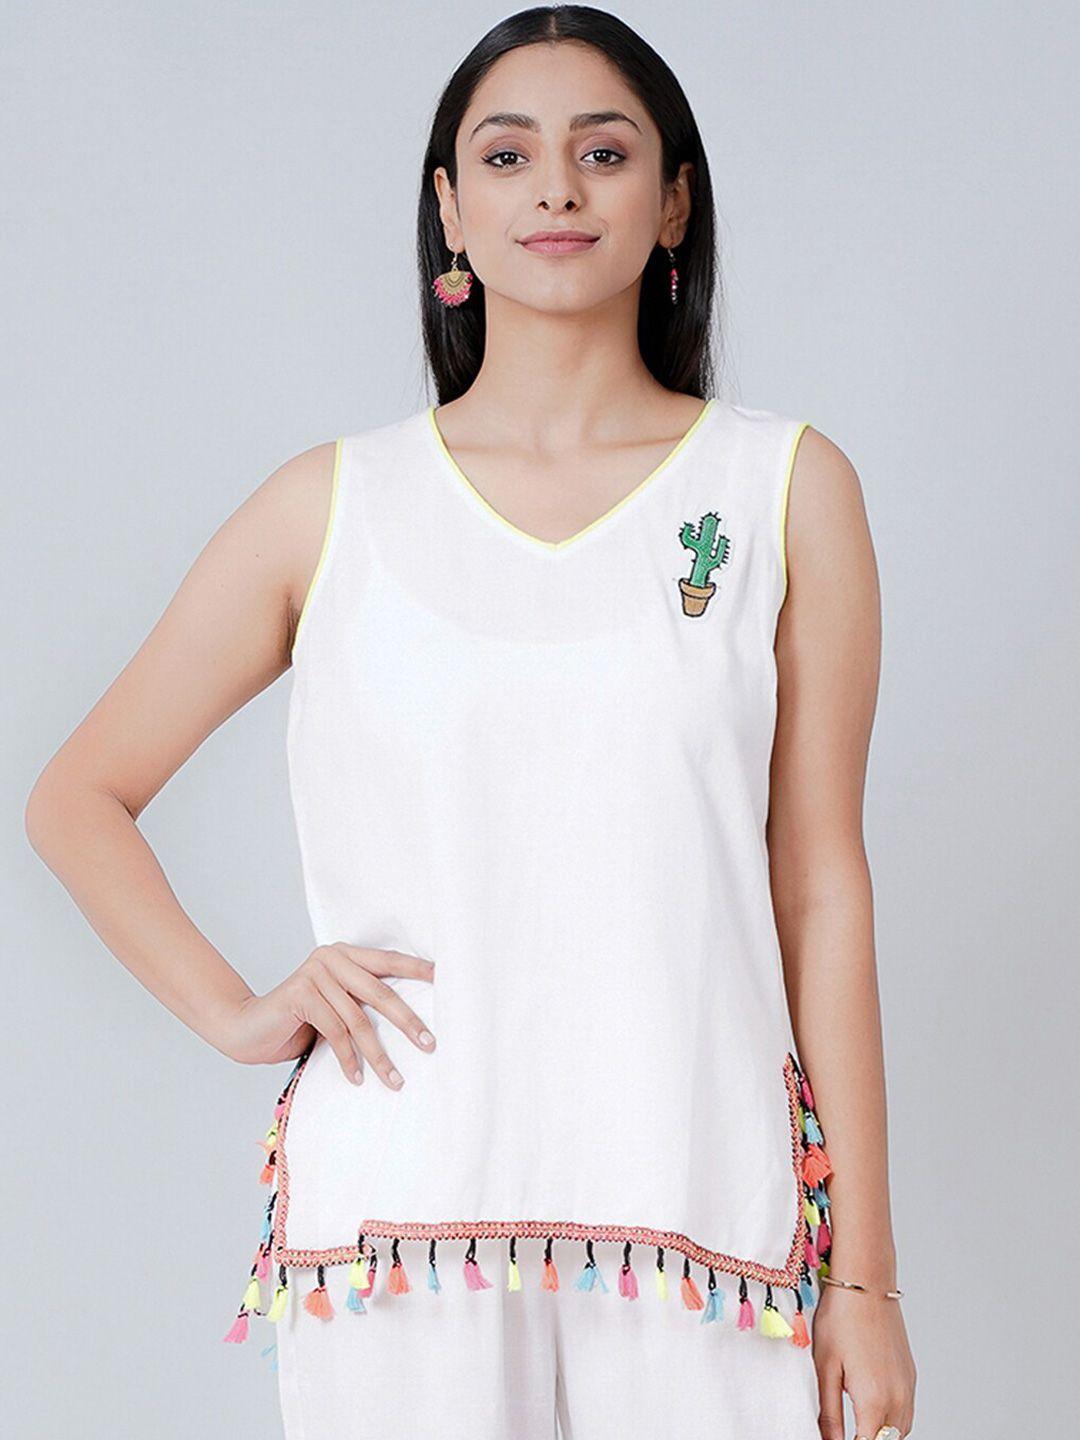 first resort by ramola bachchan women white solid v-neck sleeveless top